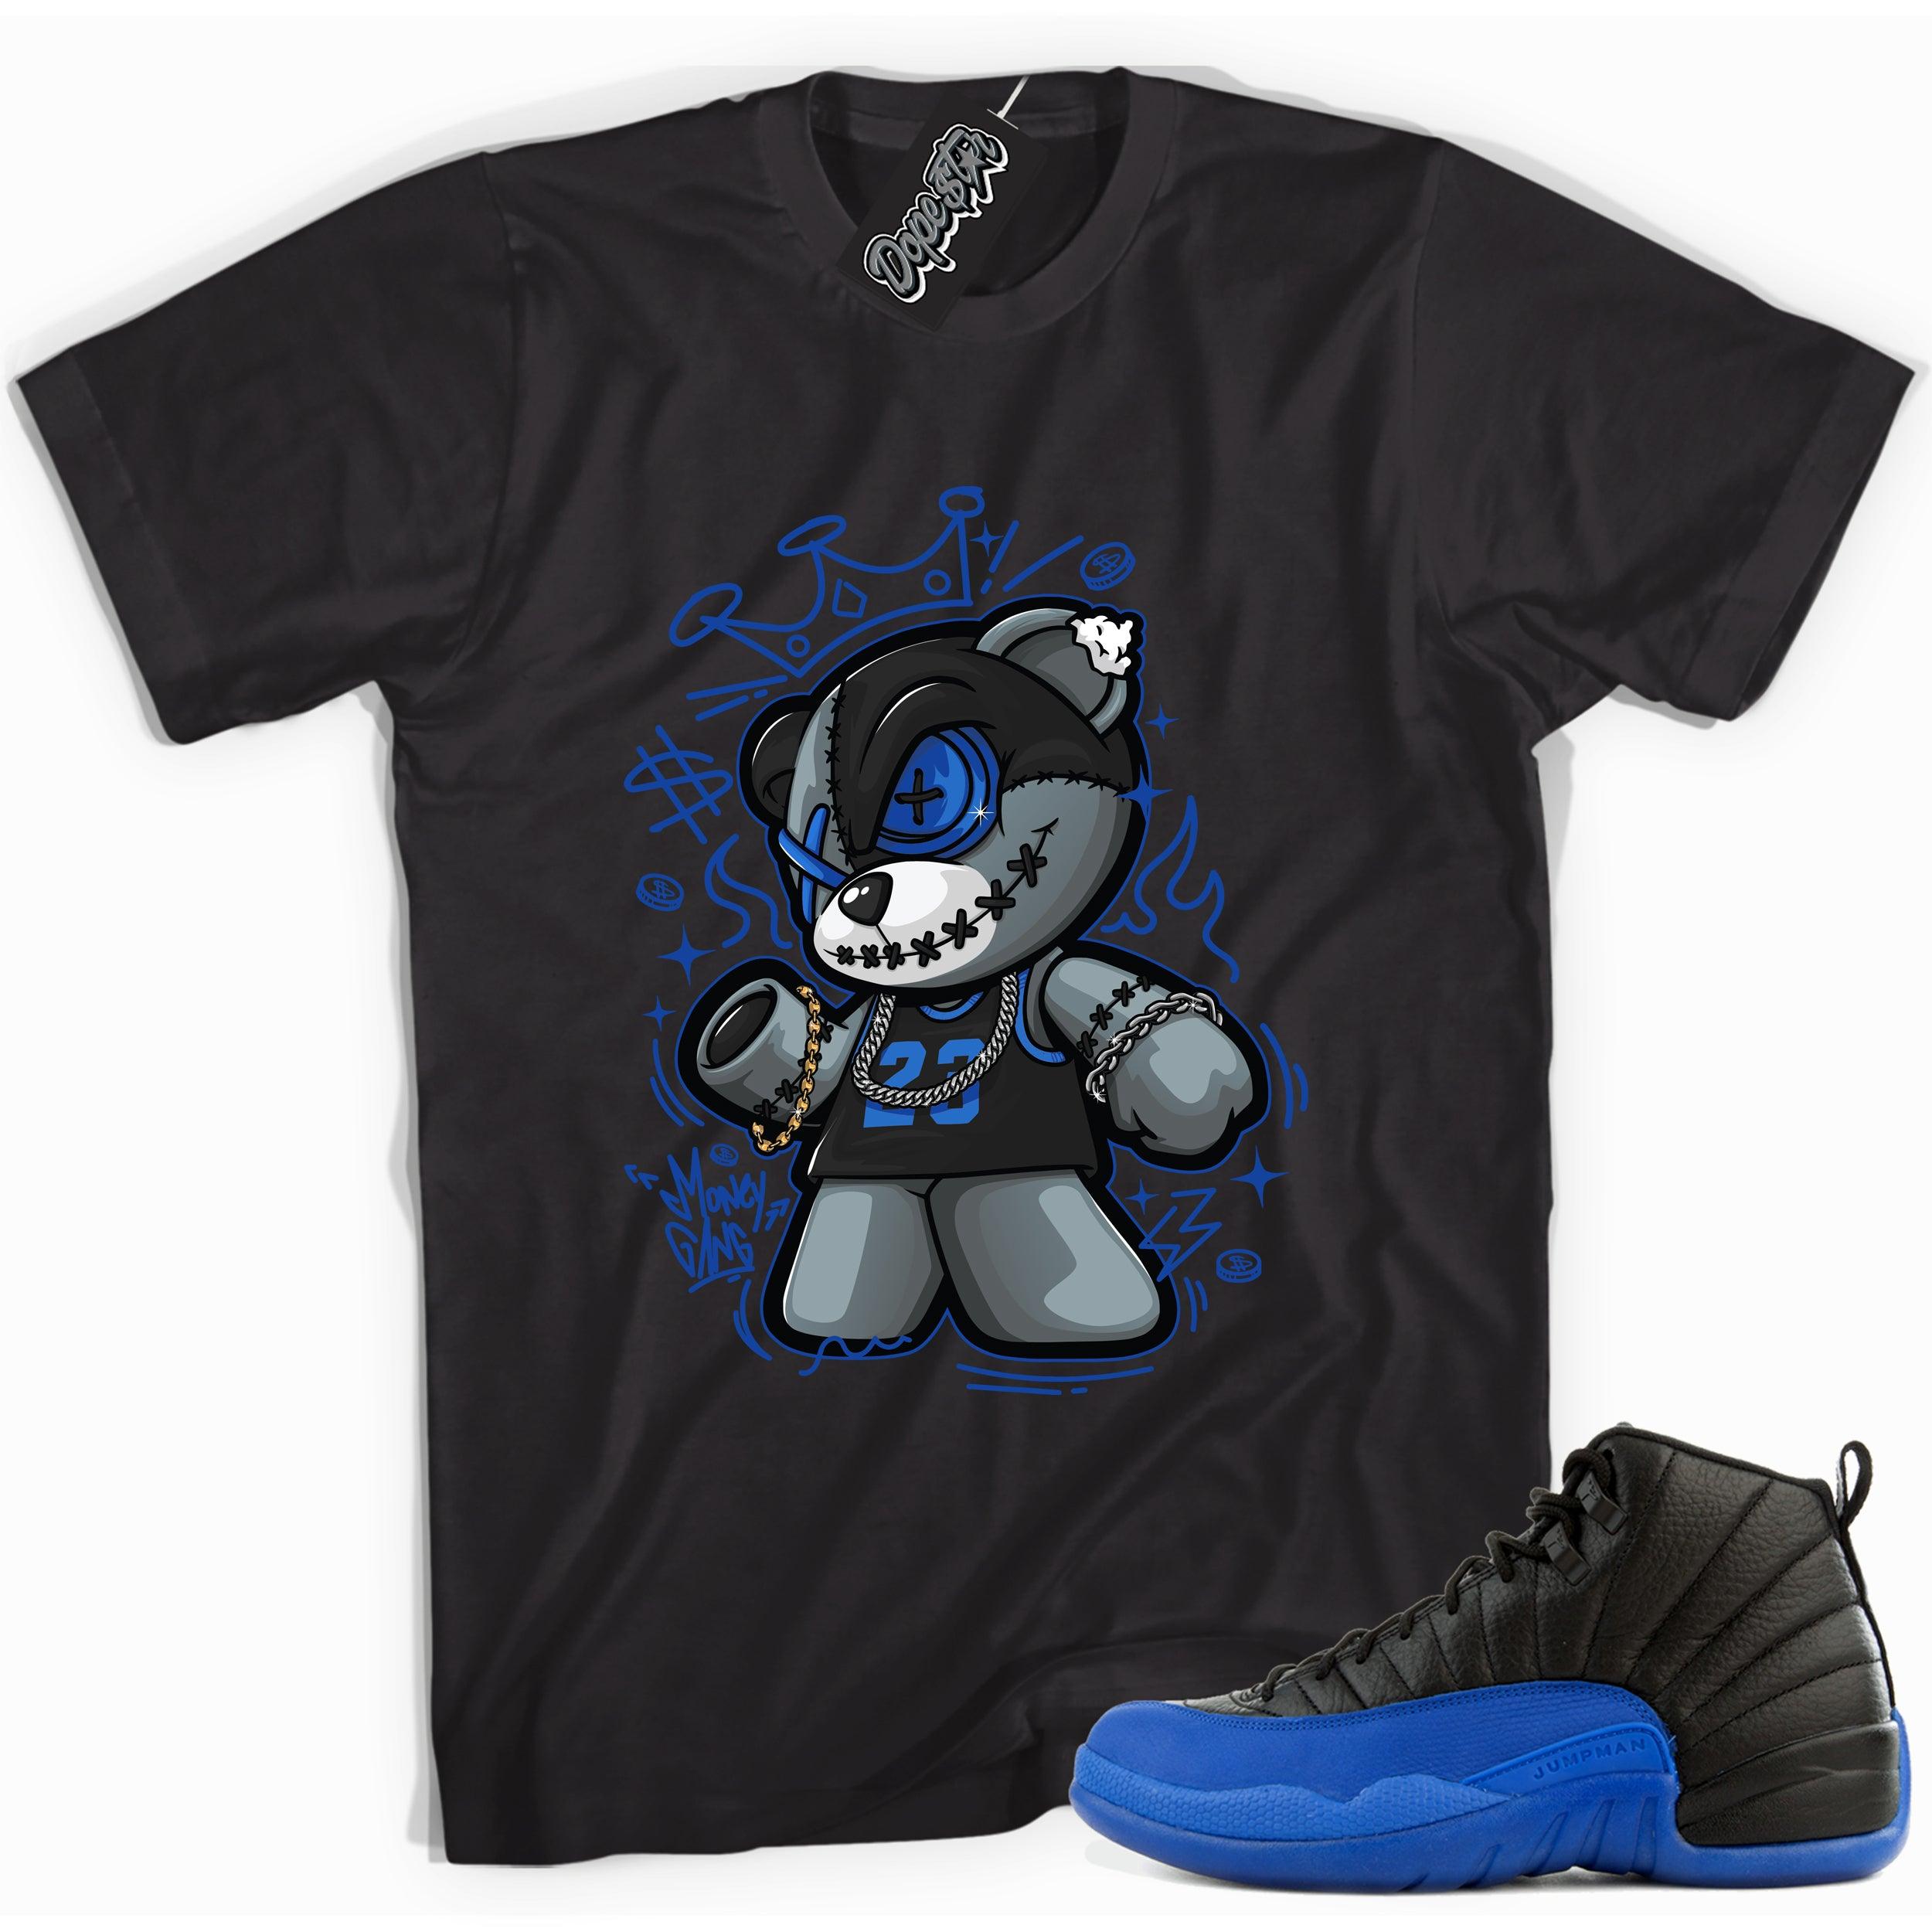 Cool black graphic tee with 'money gang bear' print, that perfectly matches  Air Jordan 12 Retro Black Game Royal sneakers.